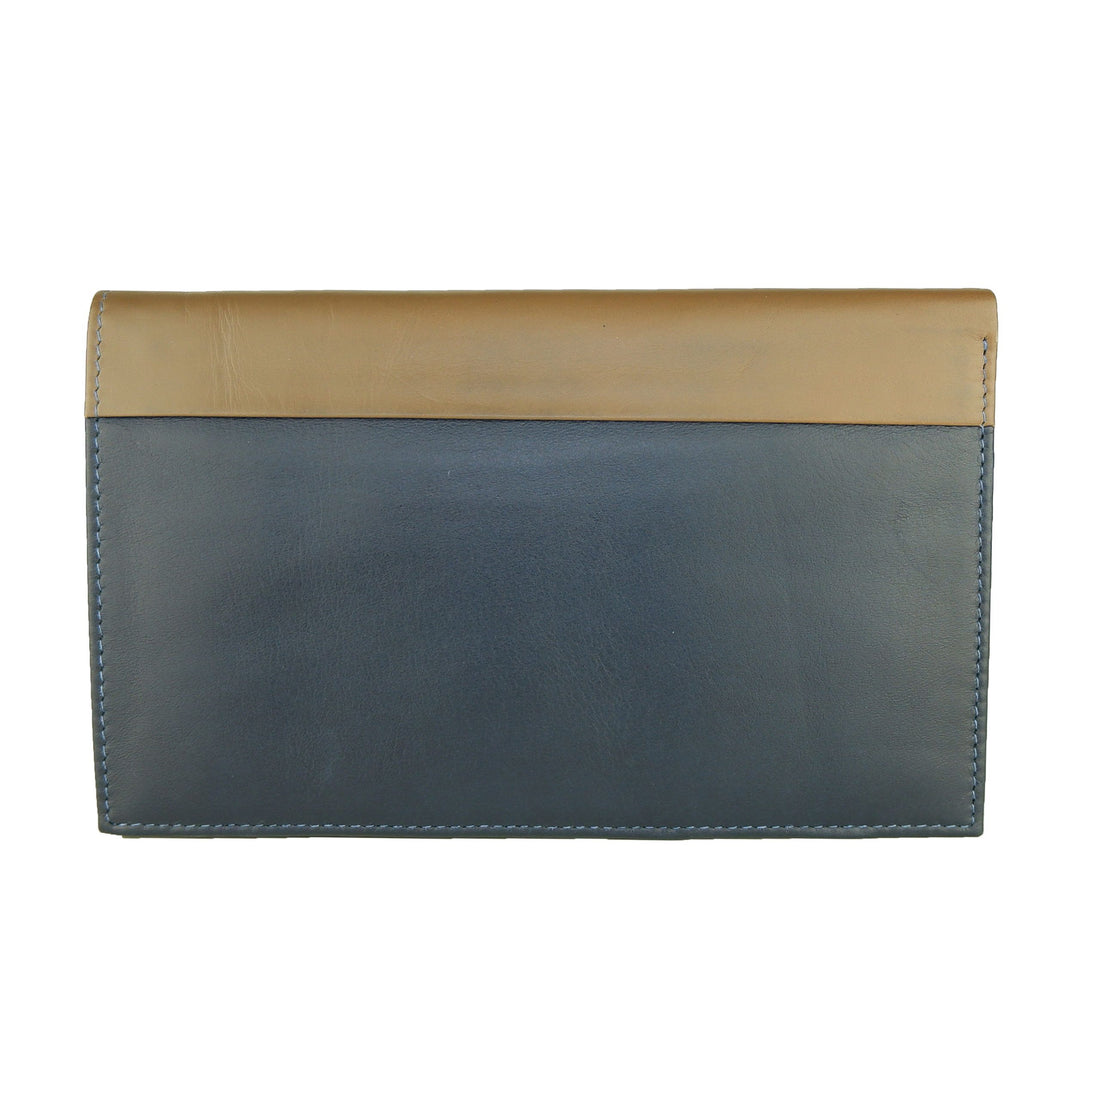 Cavalli Class Elegant Blue and Beige Leather Wallet